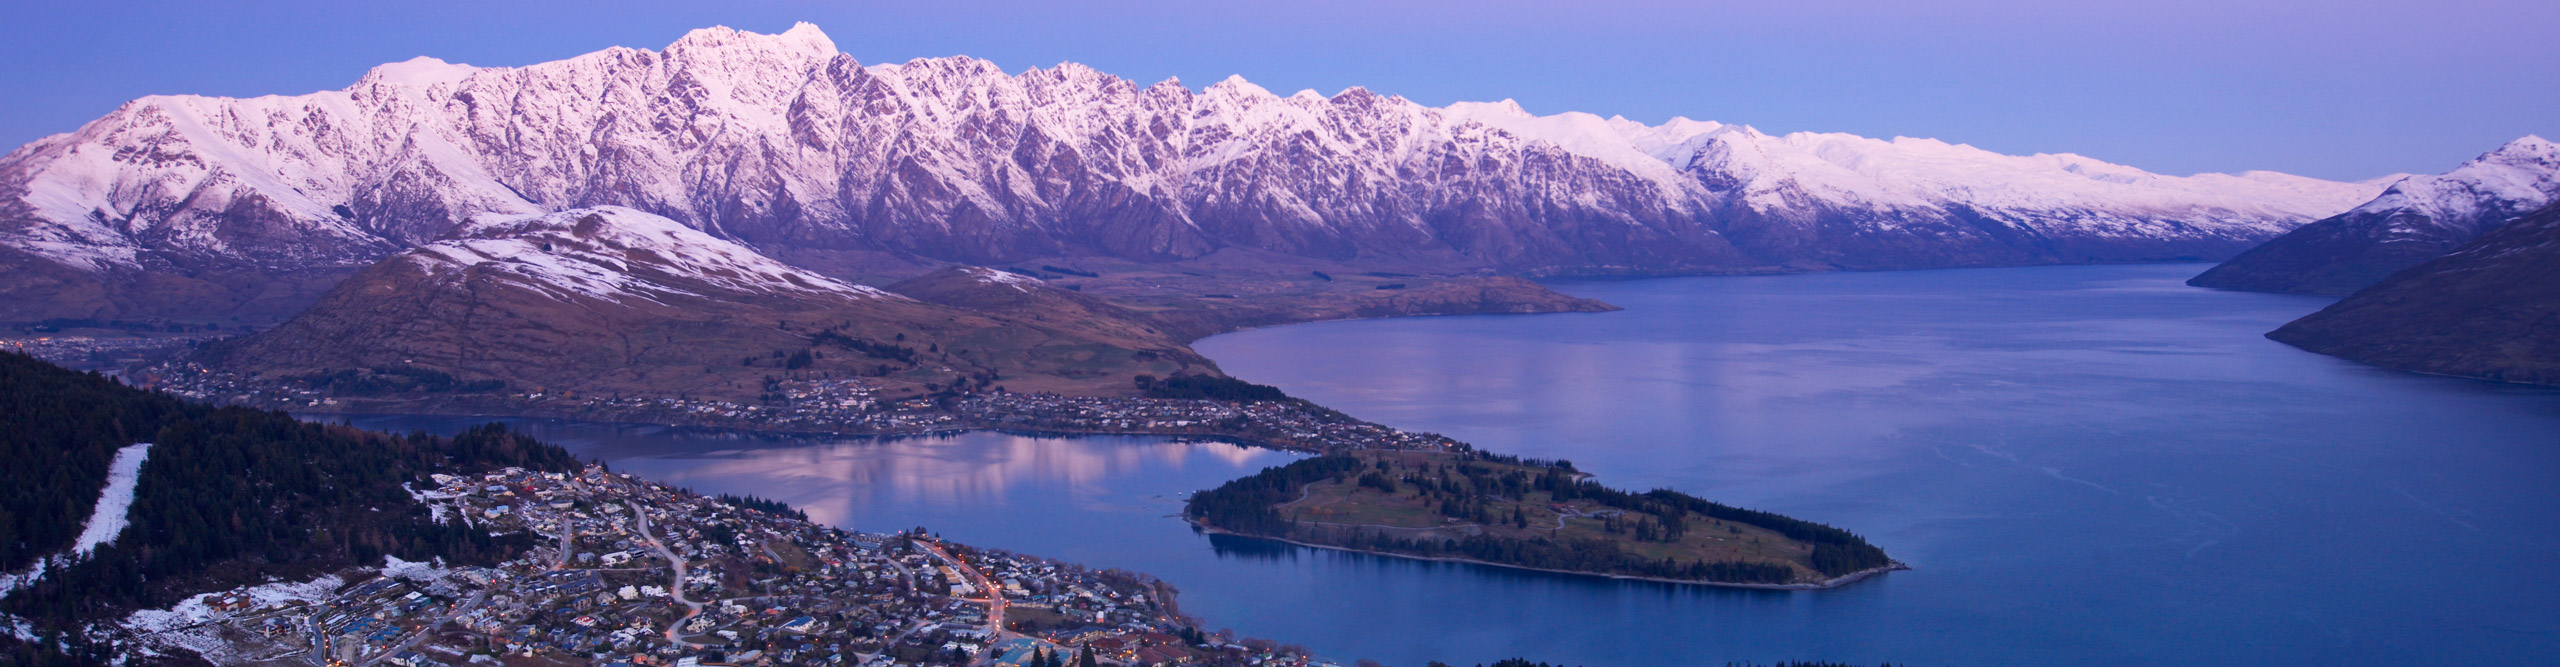 Queenstown and the snowcapped Remarkables range at sunset, New Zealand 